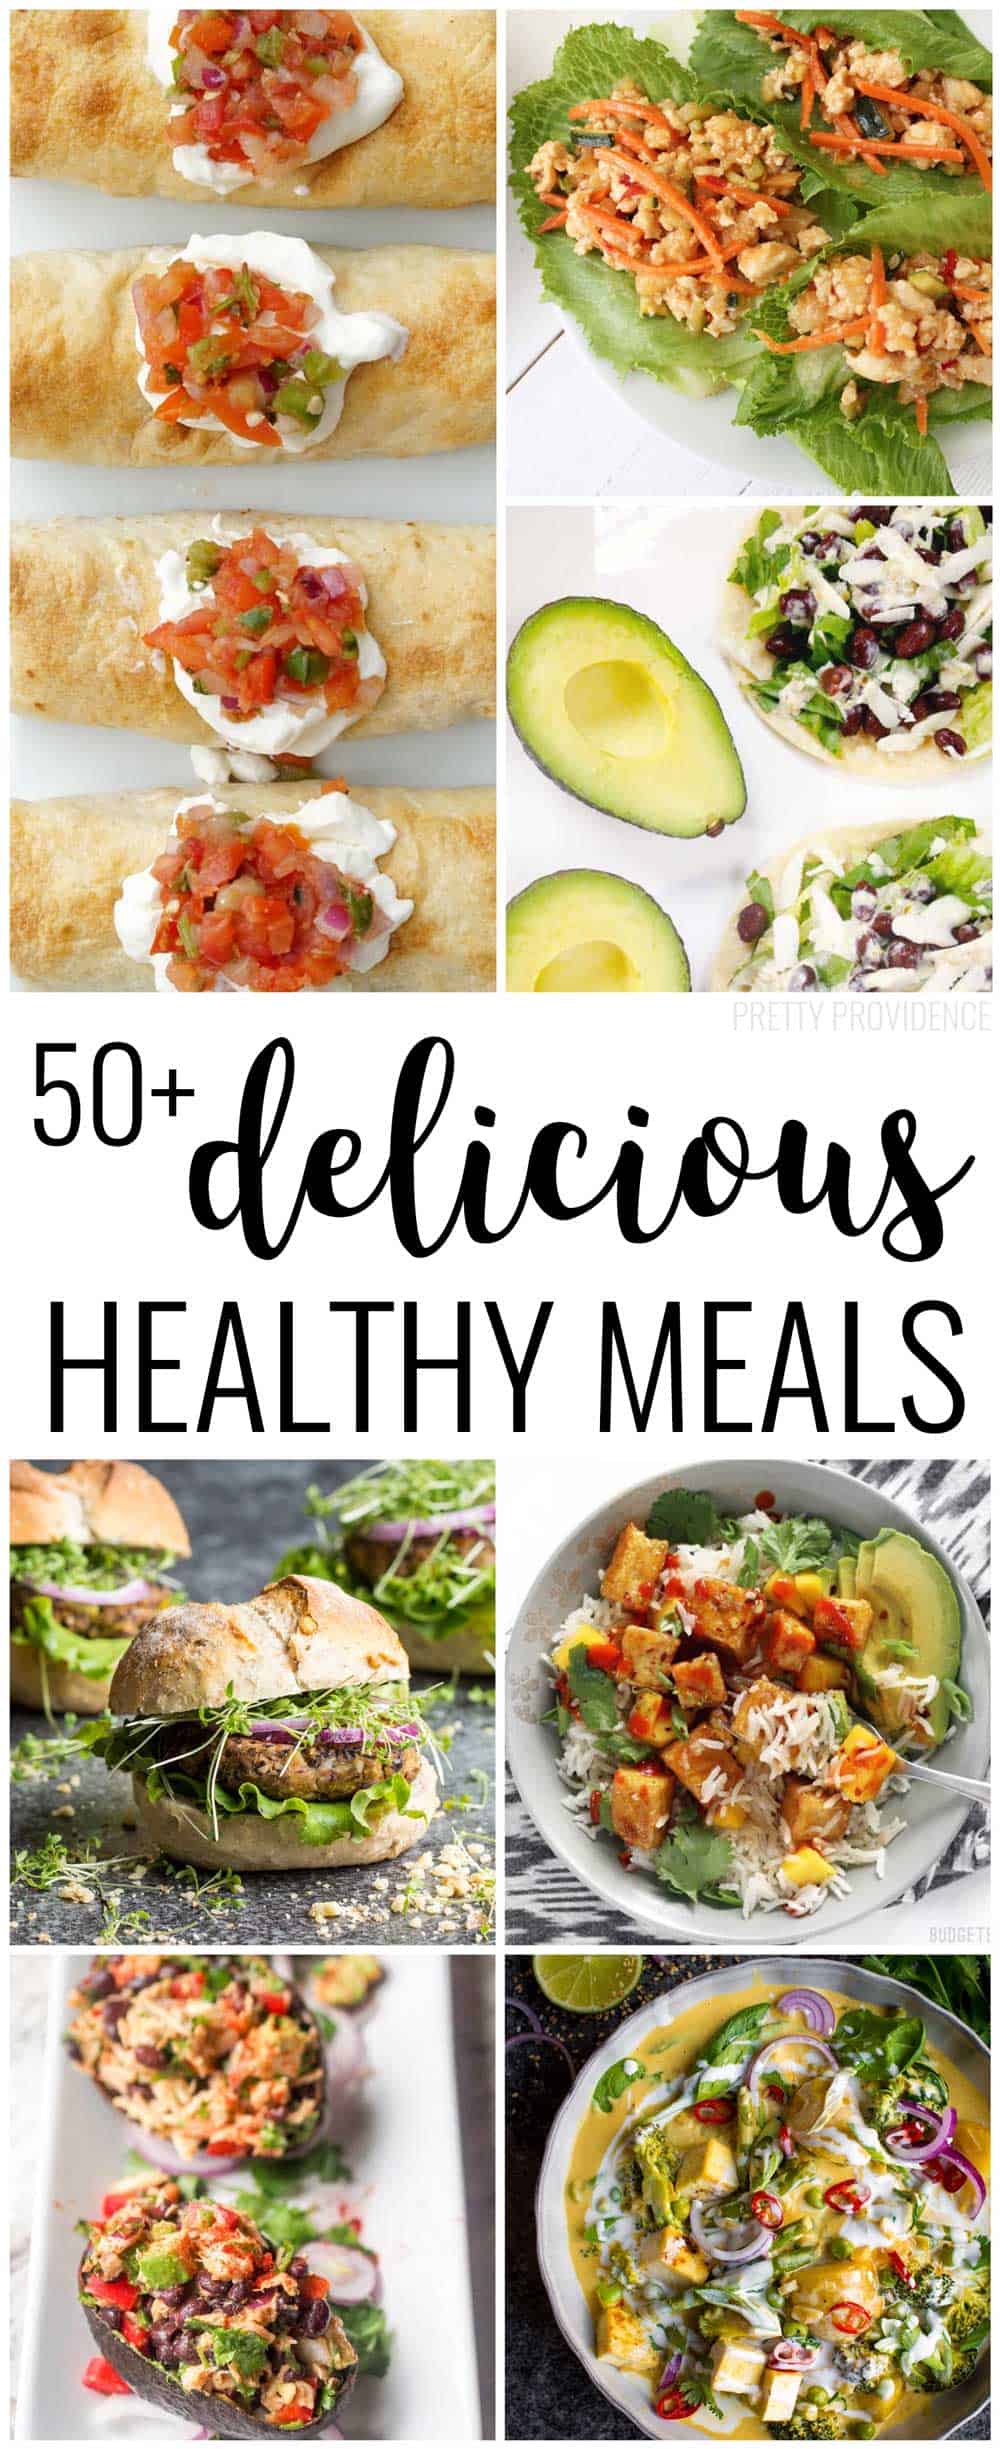 There are so many amazing, guilt-free healthy recipes here! Lots of low carb, veggie, weight watchers-friendly ideas! 